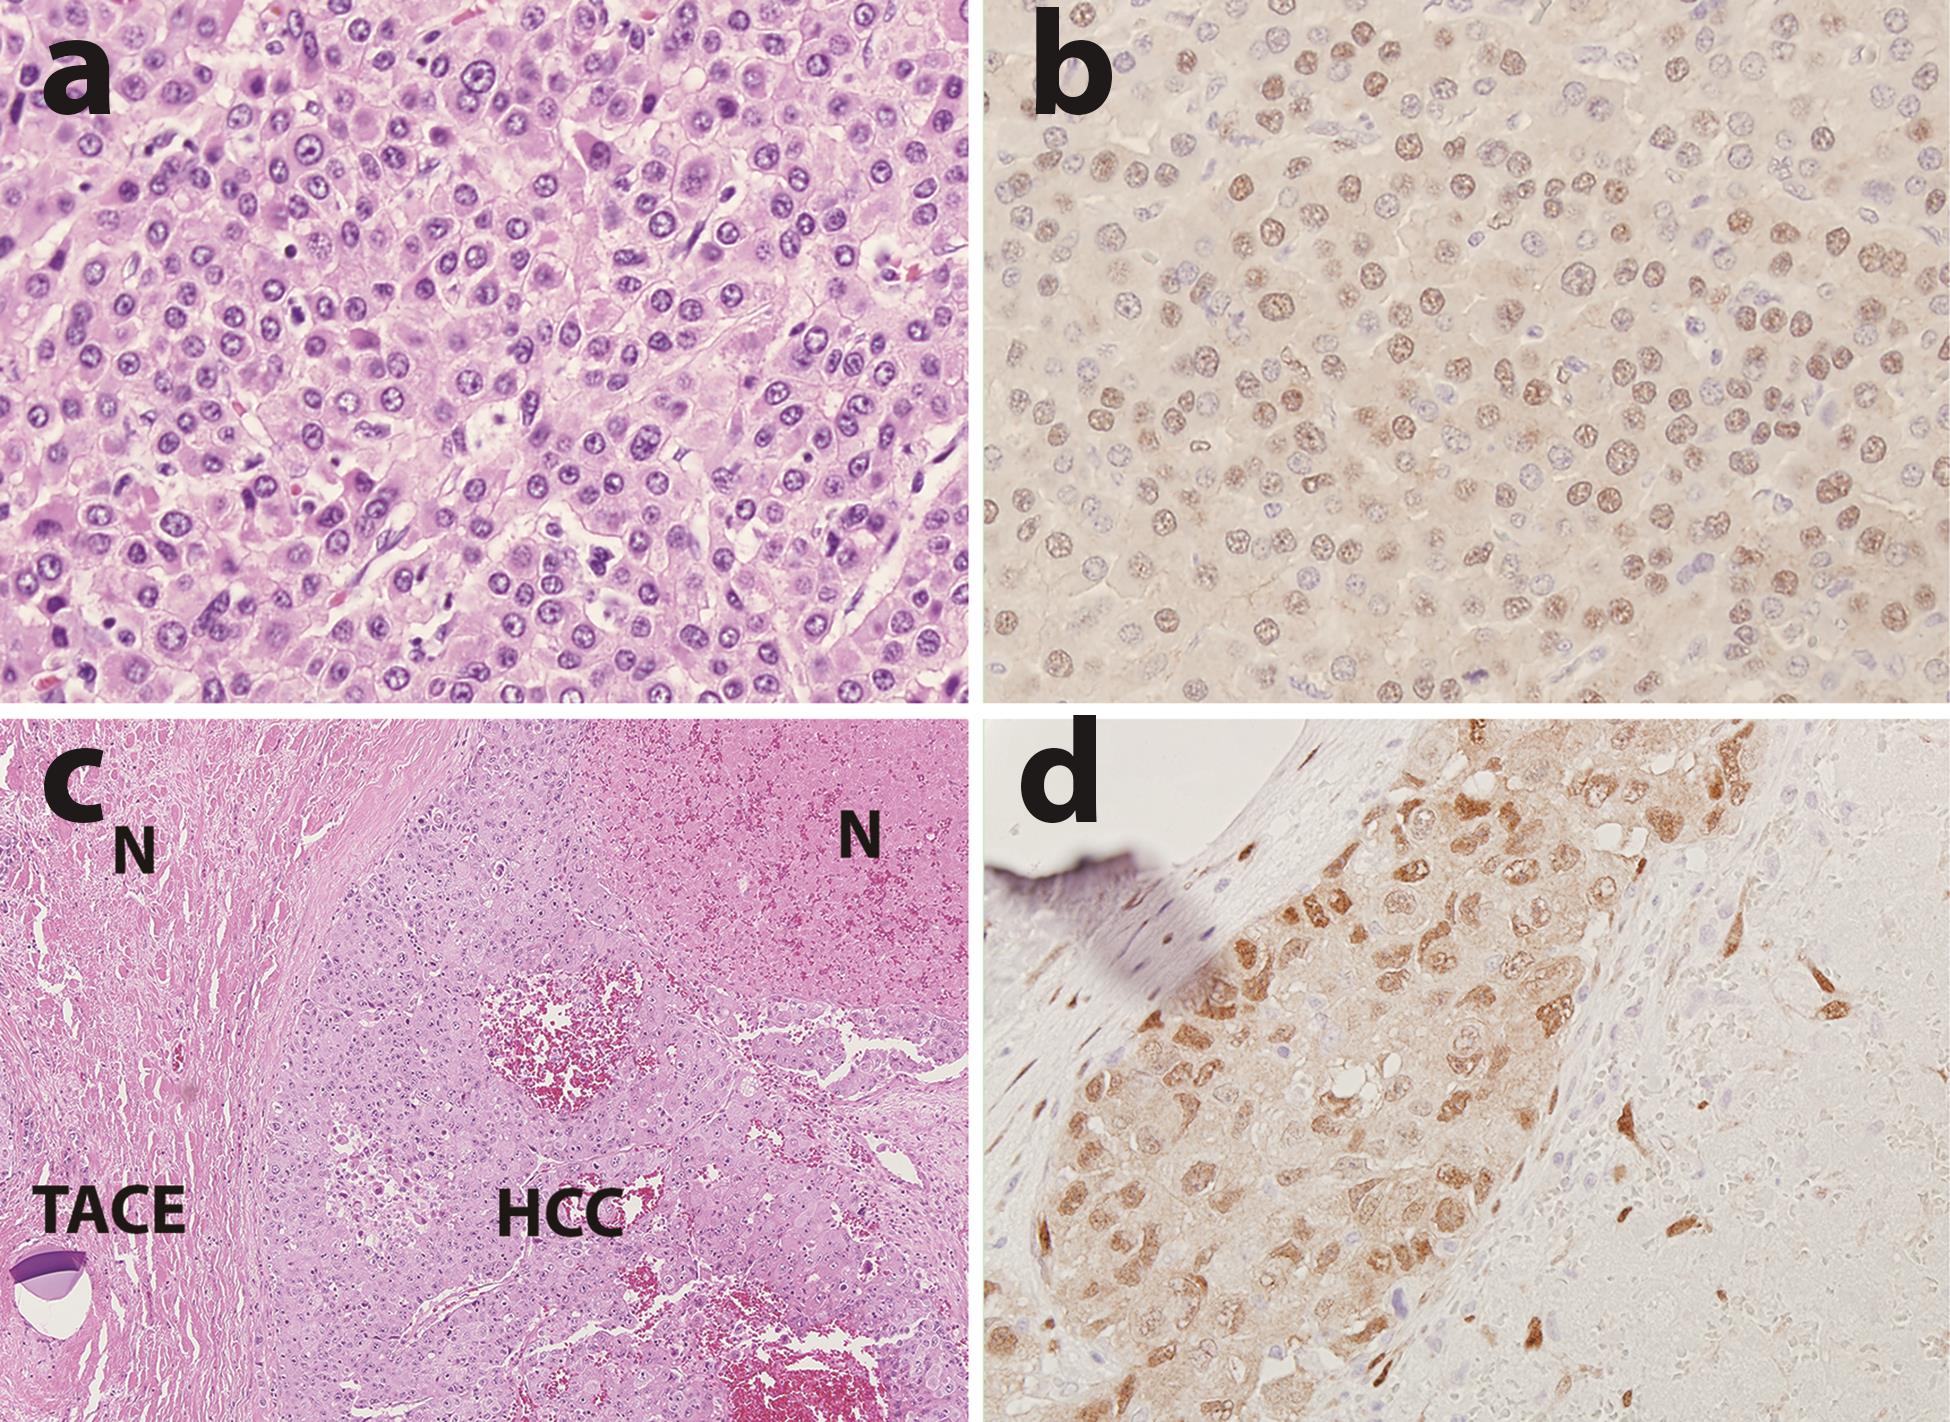 YAP1 immuno-reactivity in a case of primary hepatocellular carcinoma (HCC) (a, b) and the residual HCC after trans-arterial chemoembolization (TACE) treatment (c, d) with background of TACE-caused tumor necrosis (N) (a and c, H&E stain; a, 400×; c, 100×;) YAP1 is weakly positive in the primary HCC (b) but increased expression in the residual HCC (d) (b–d, YAP IHC, 400×).